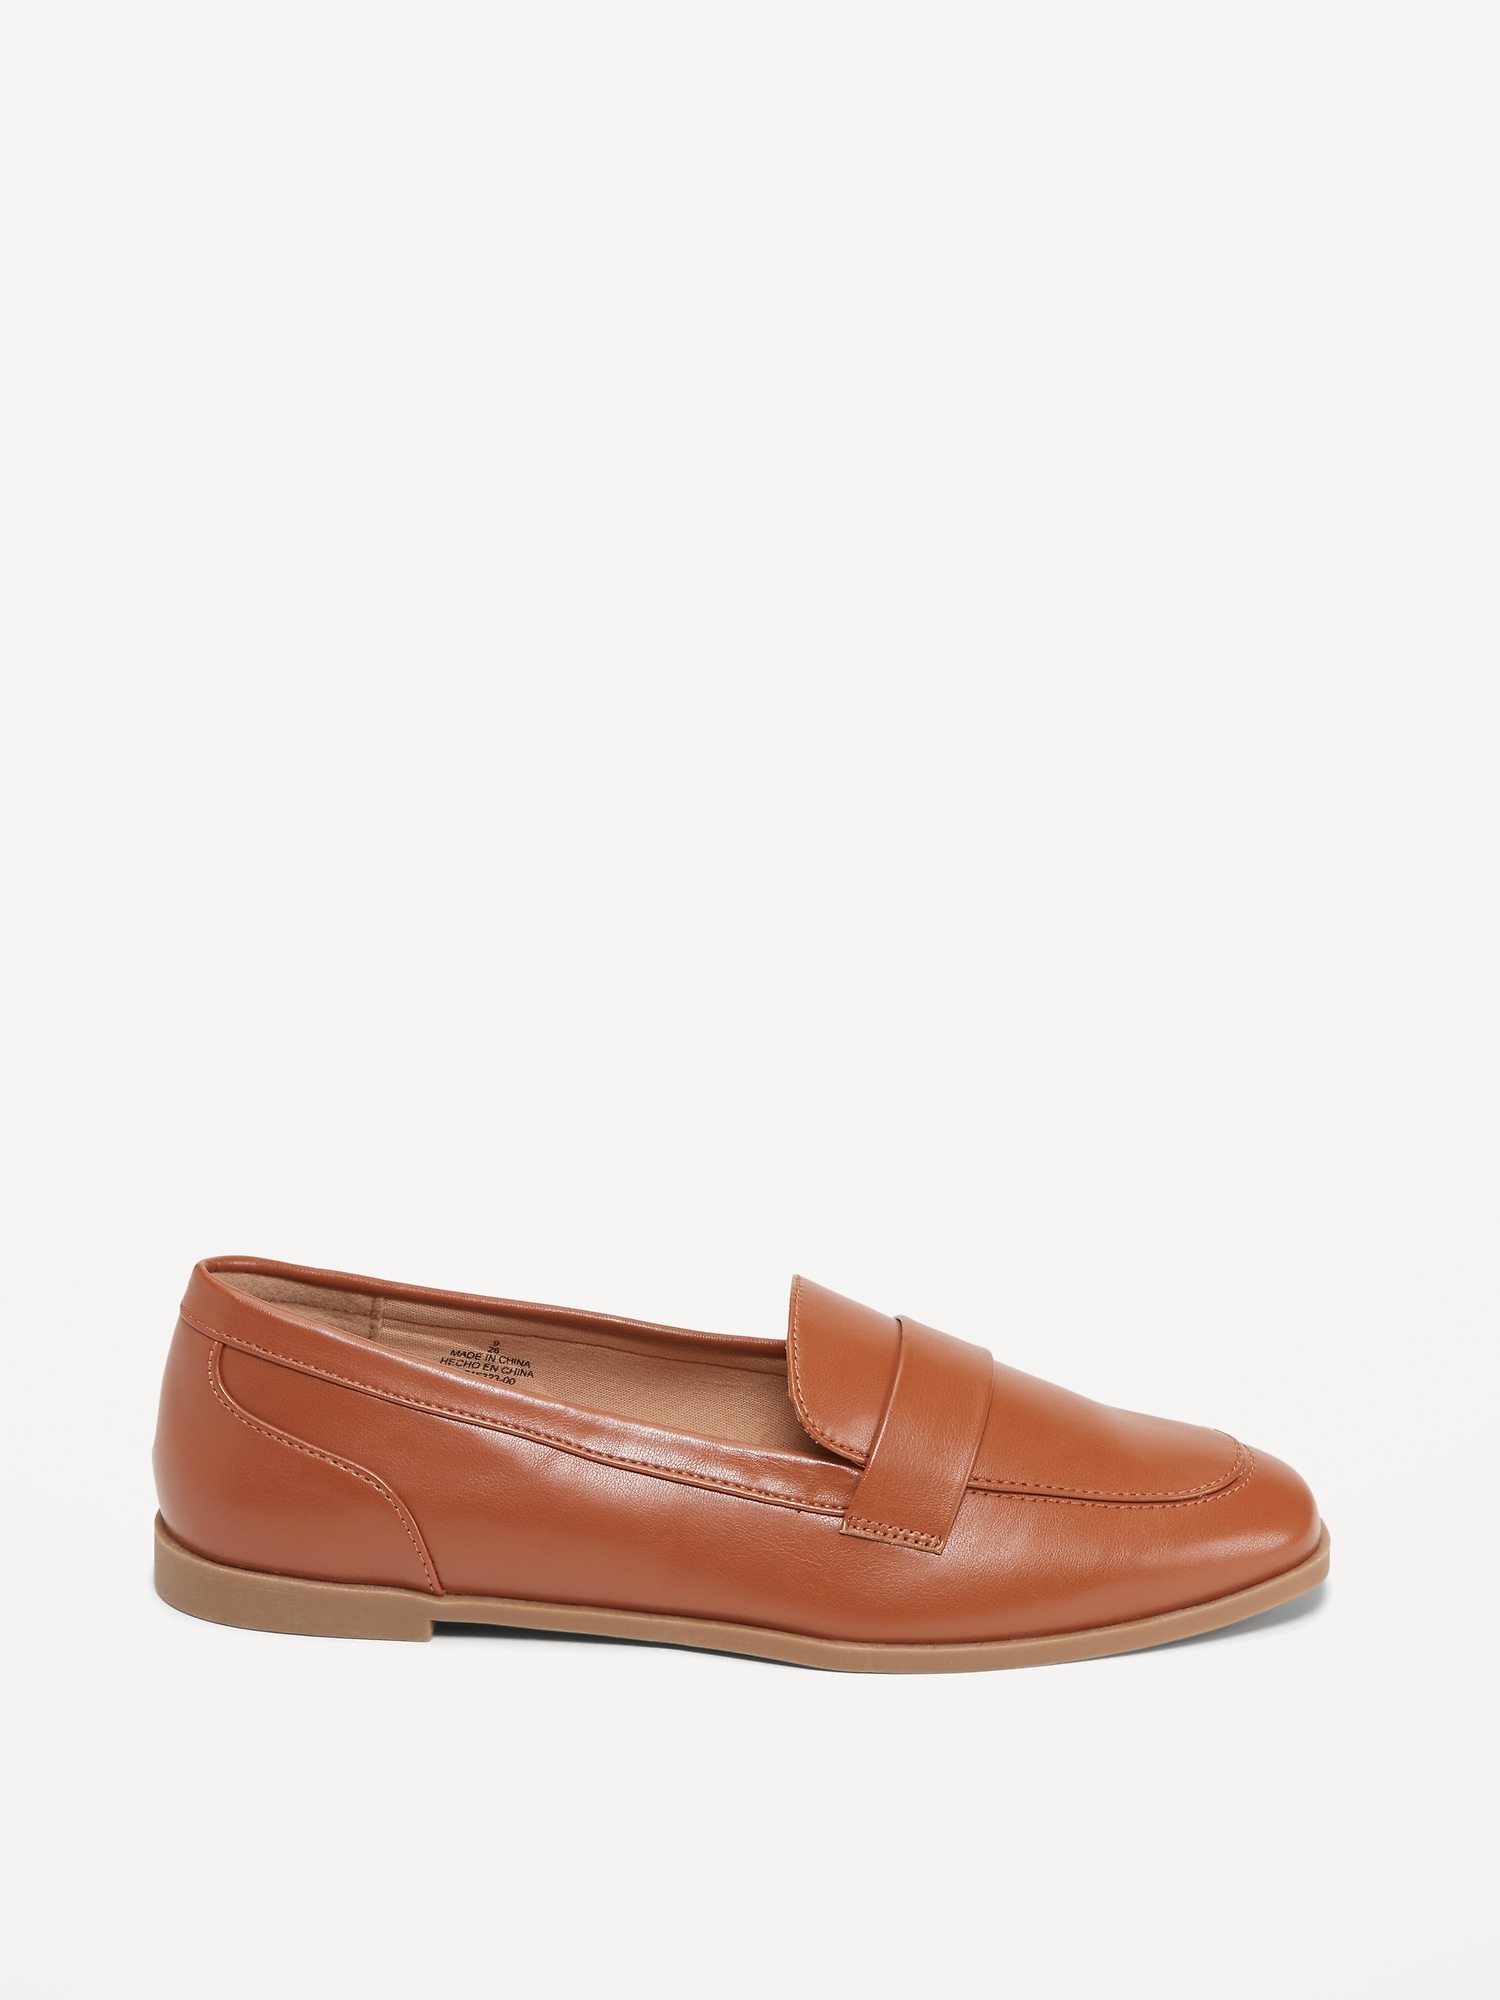 City Loafers | Old Navy